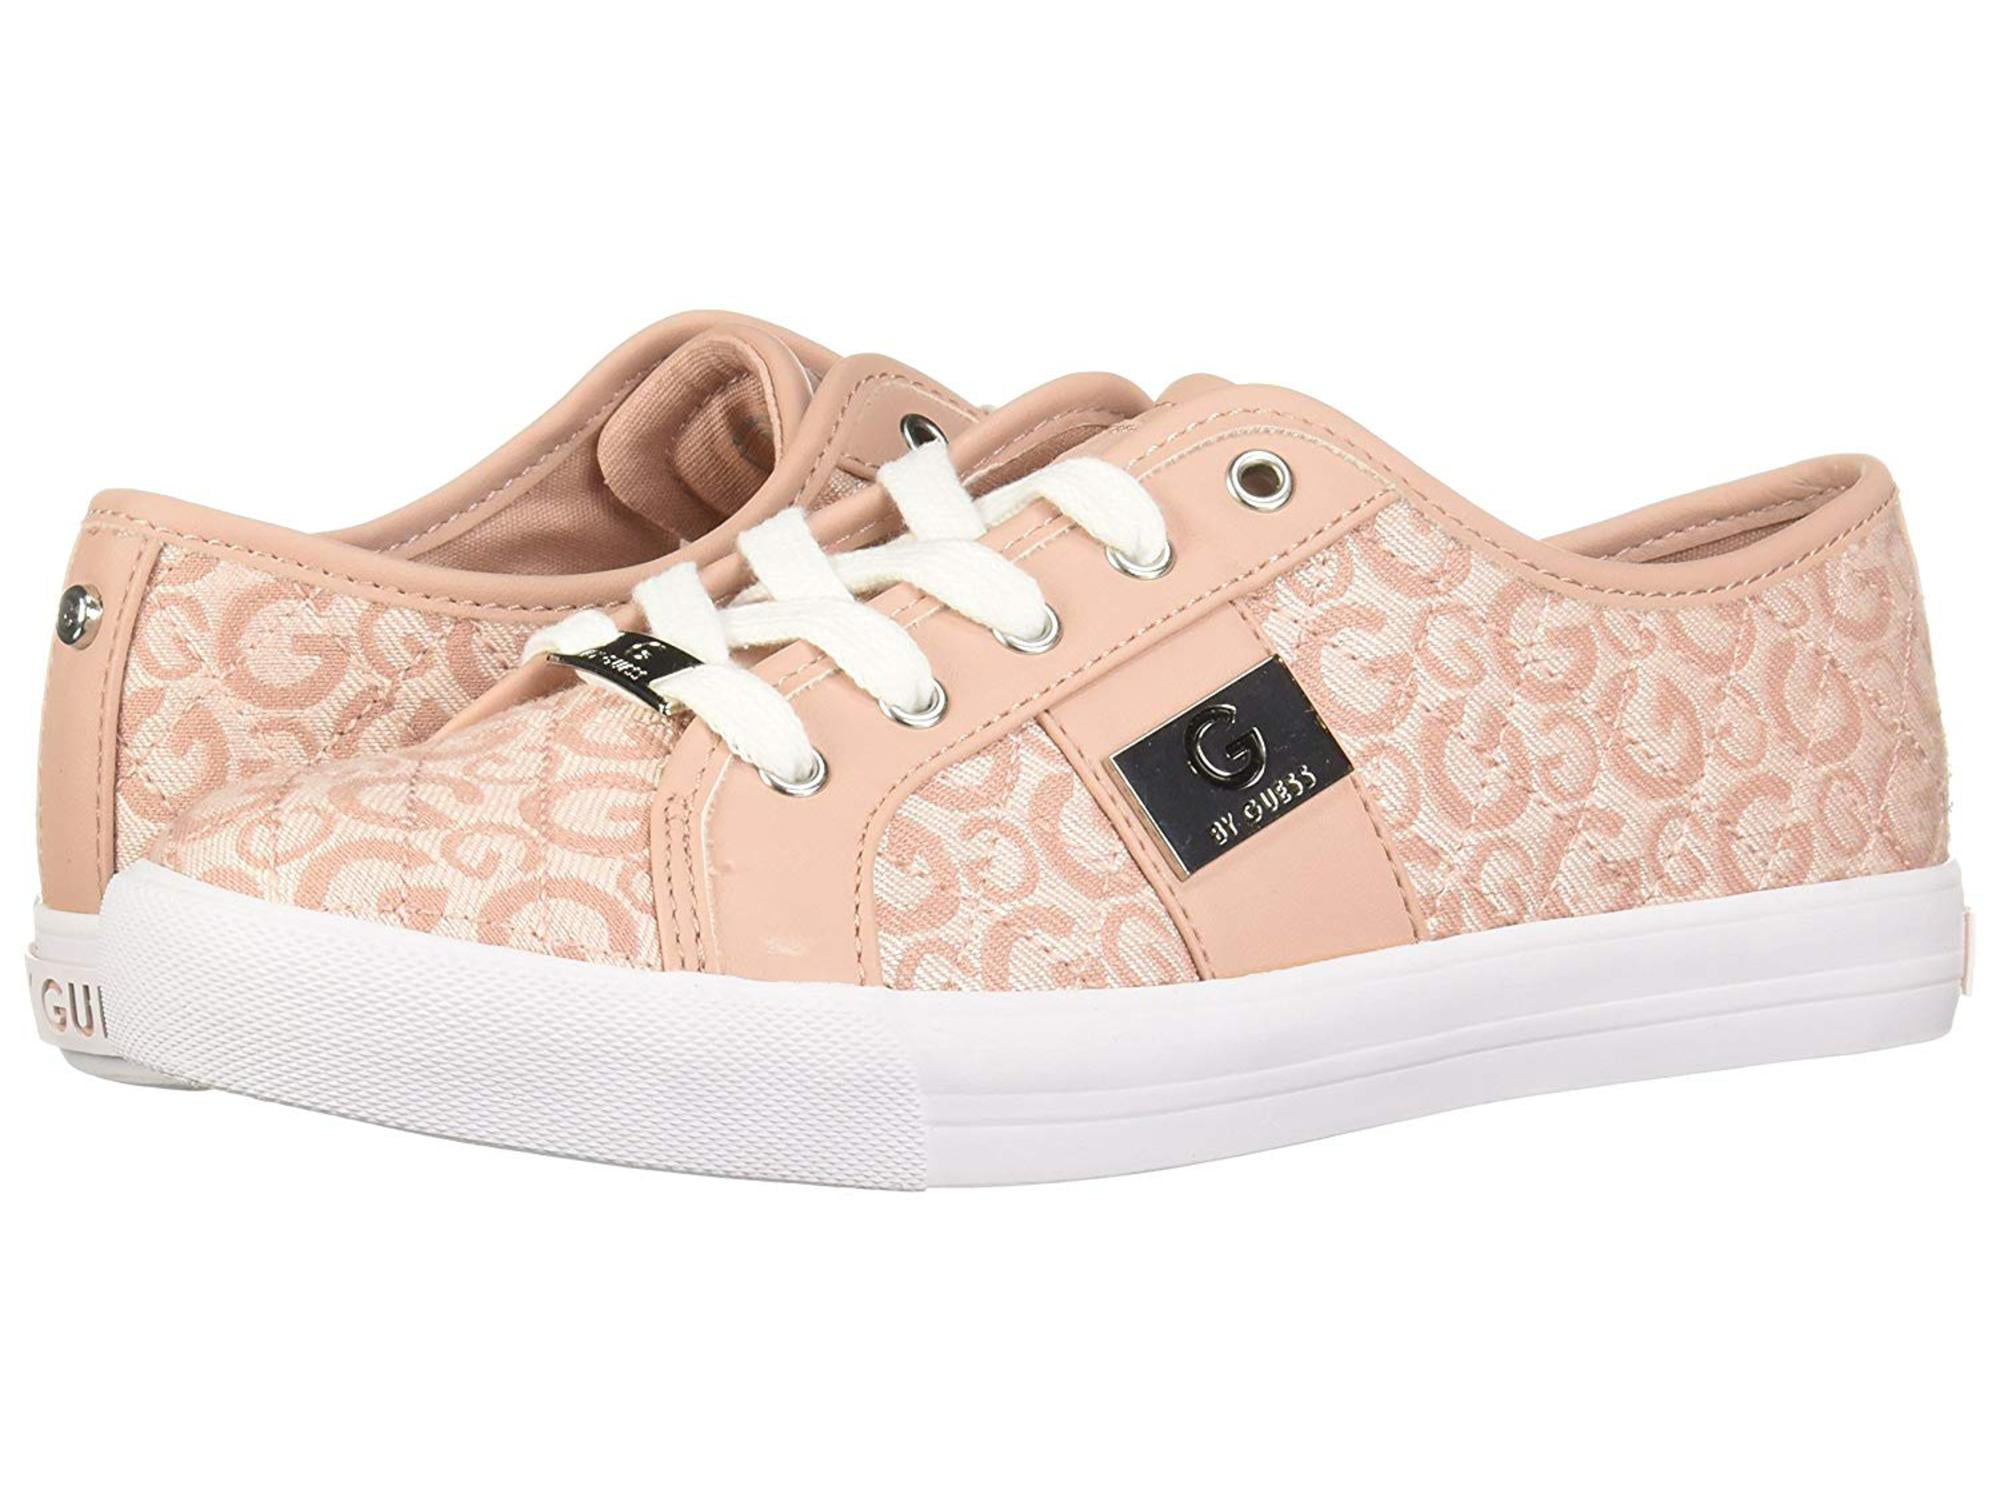 G by GUESS Backer2 Women's Lace-Up Sneakers Shoes Walmart.com